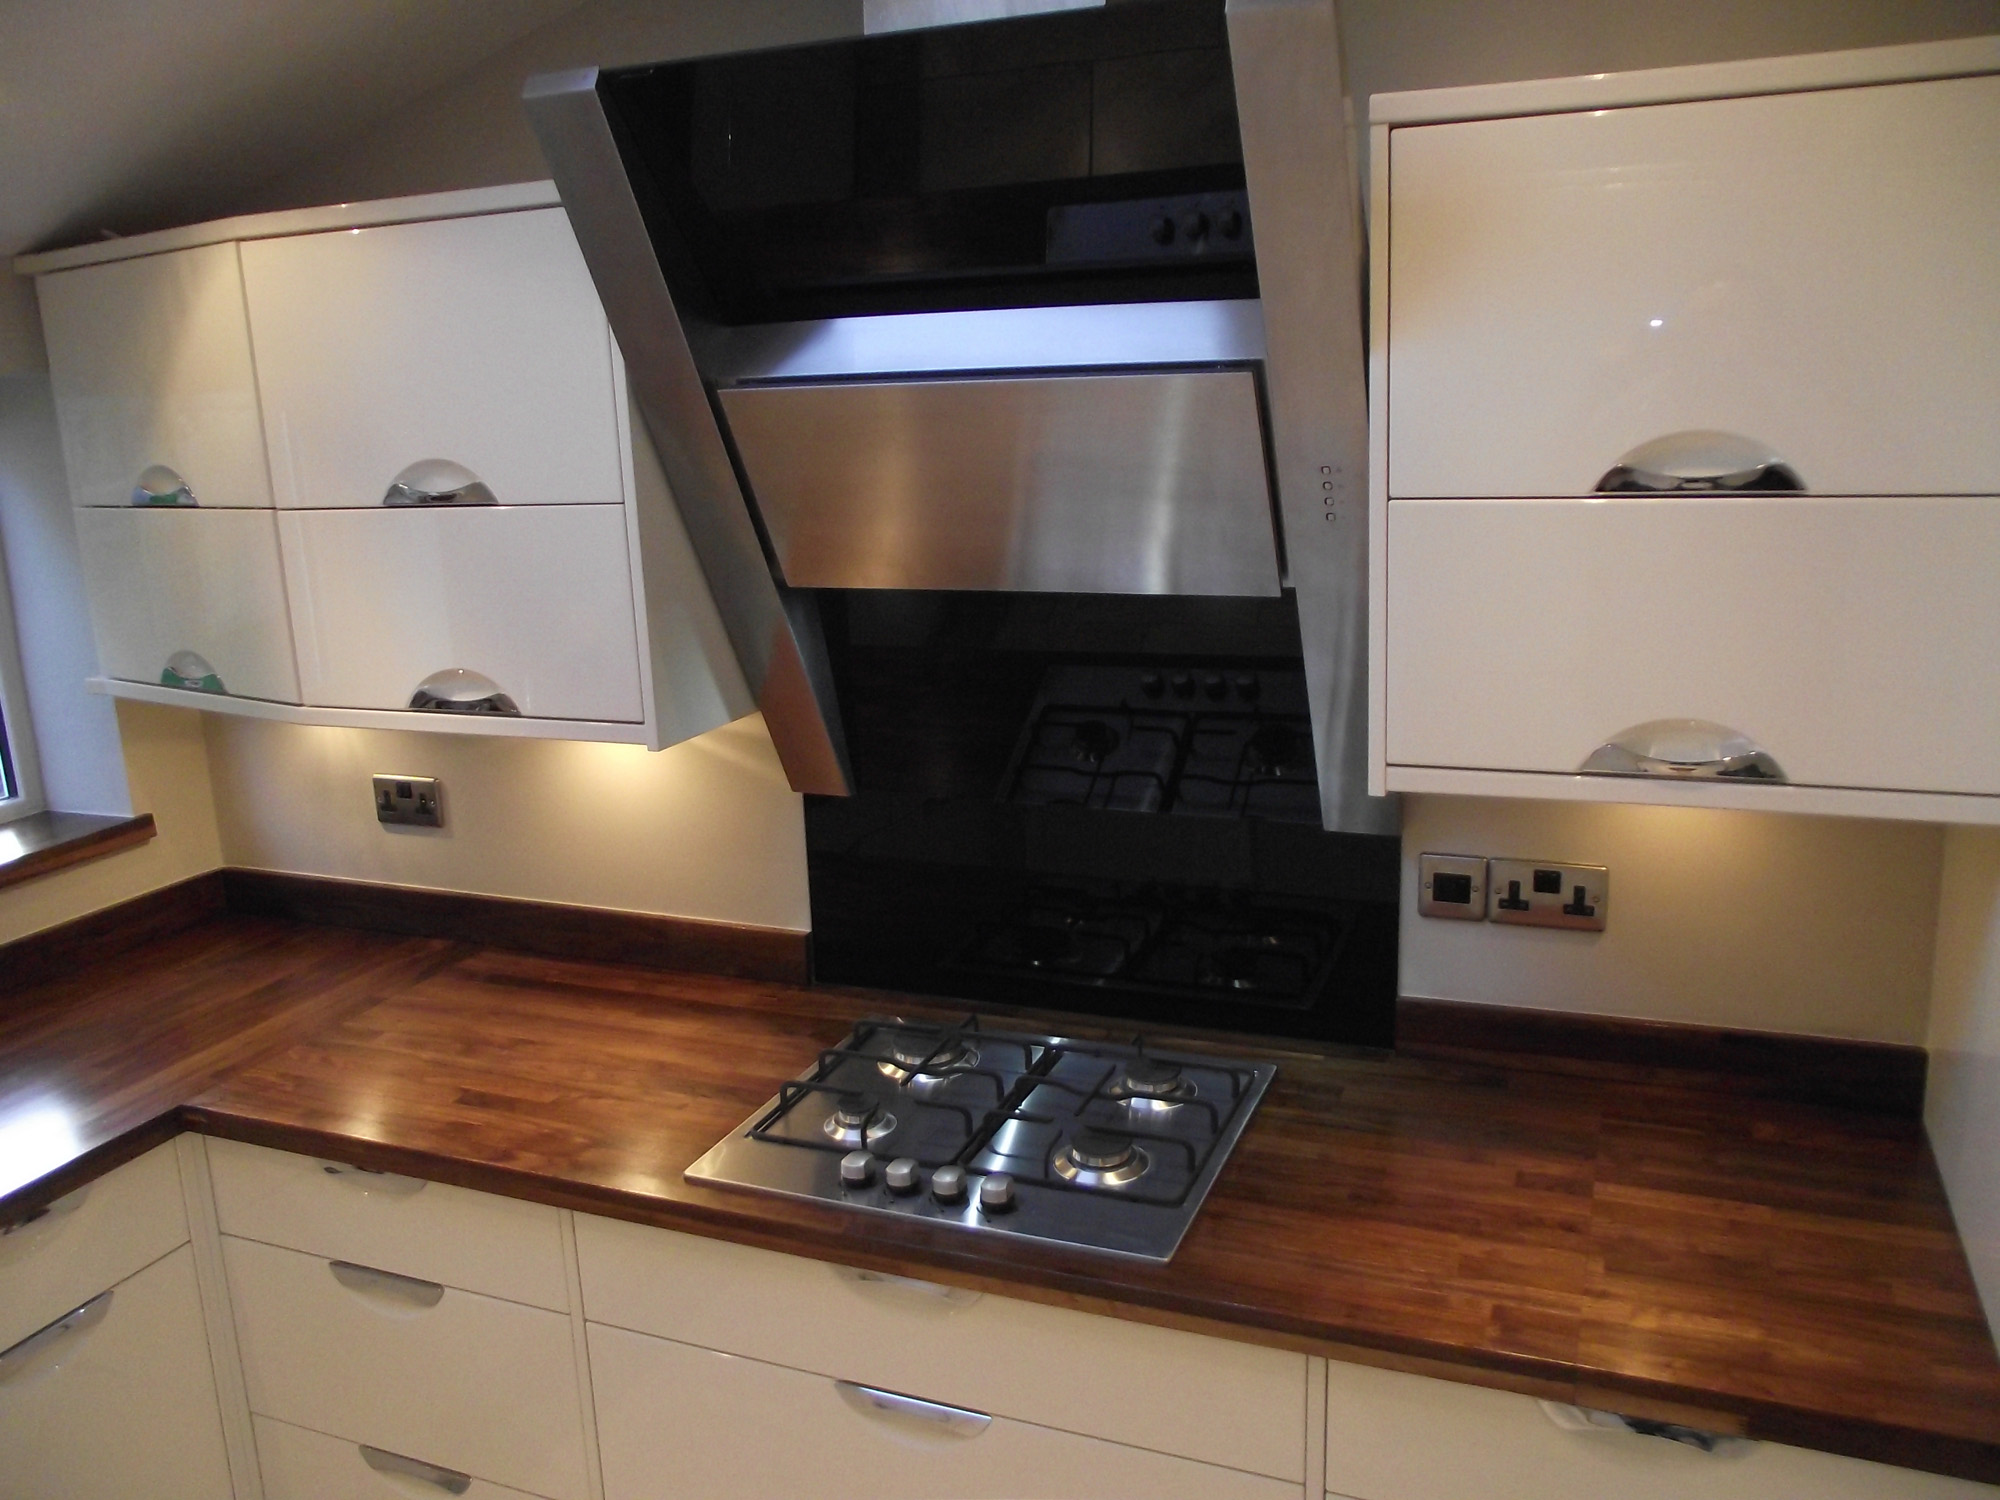 Mr Smith New Kitchen Leeds Cheap Kitchen Units And Cabinets For Sale Online Kitchen Warehouse